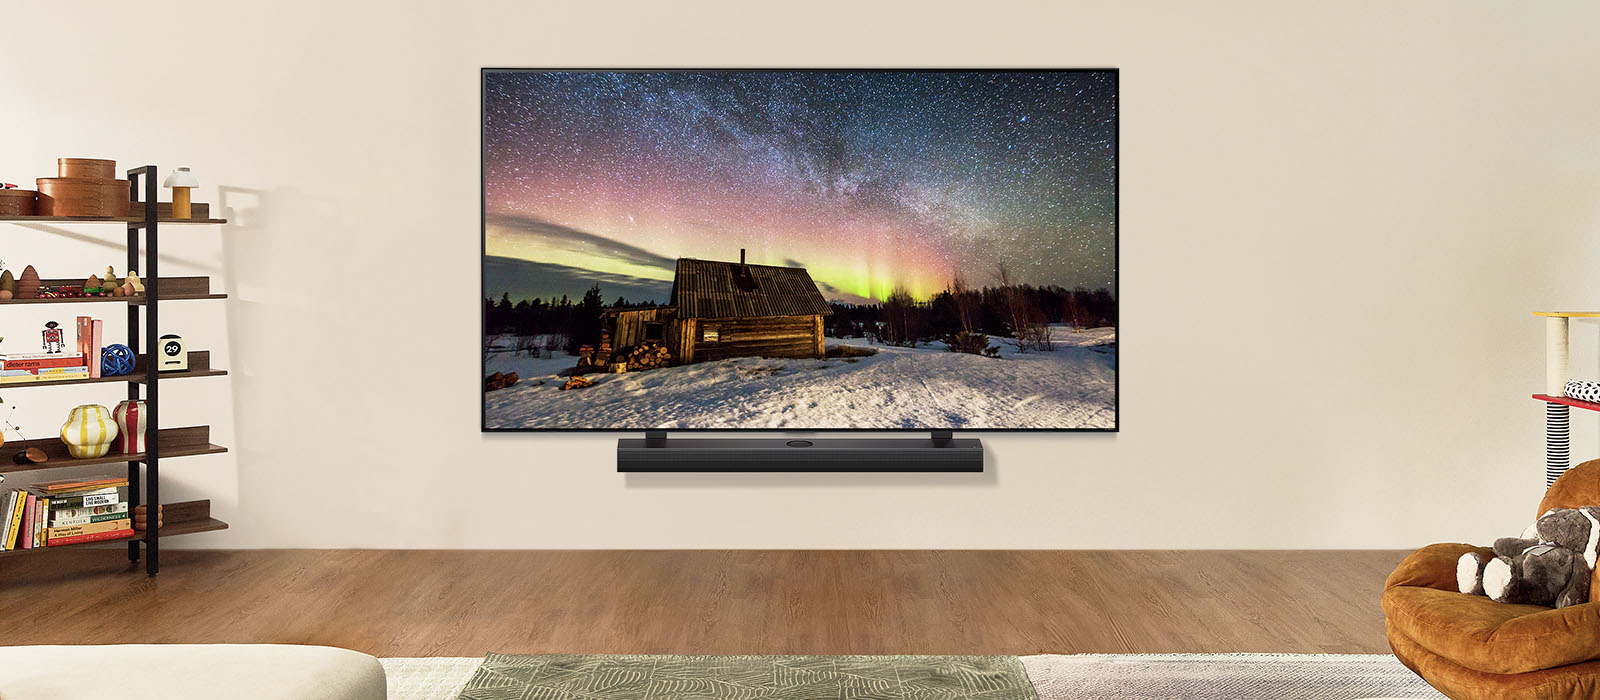 An image of an LG TV and LG Soundbar in a modern living space in daytime. The image of the aurora borealis is displayed with the ideal brightness levels.